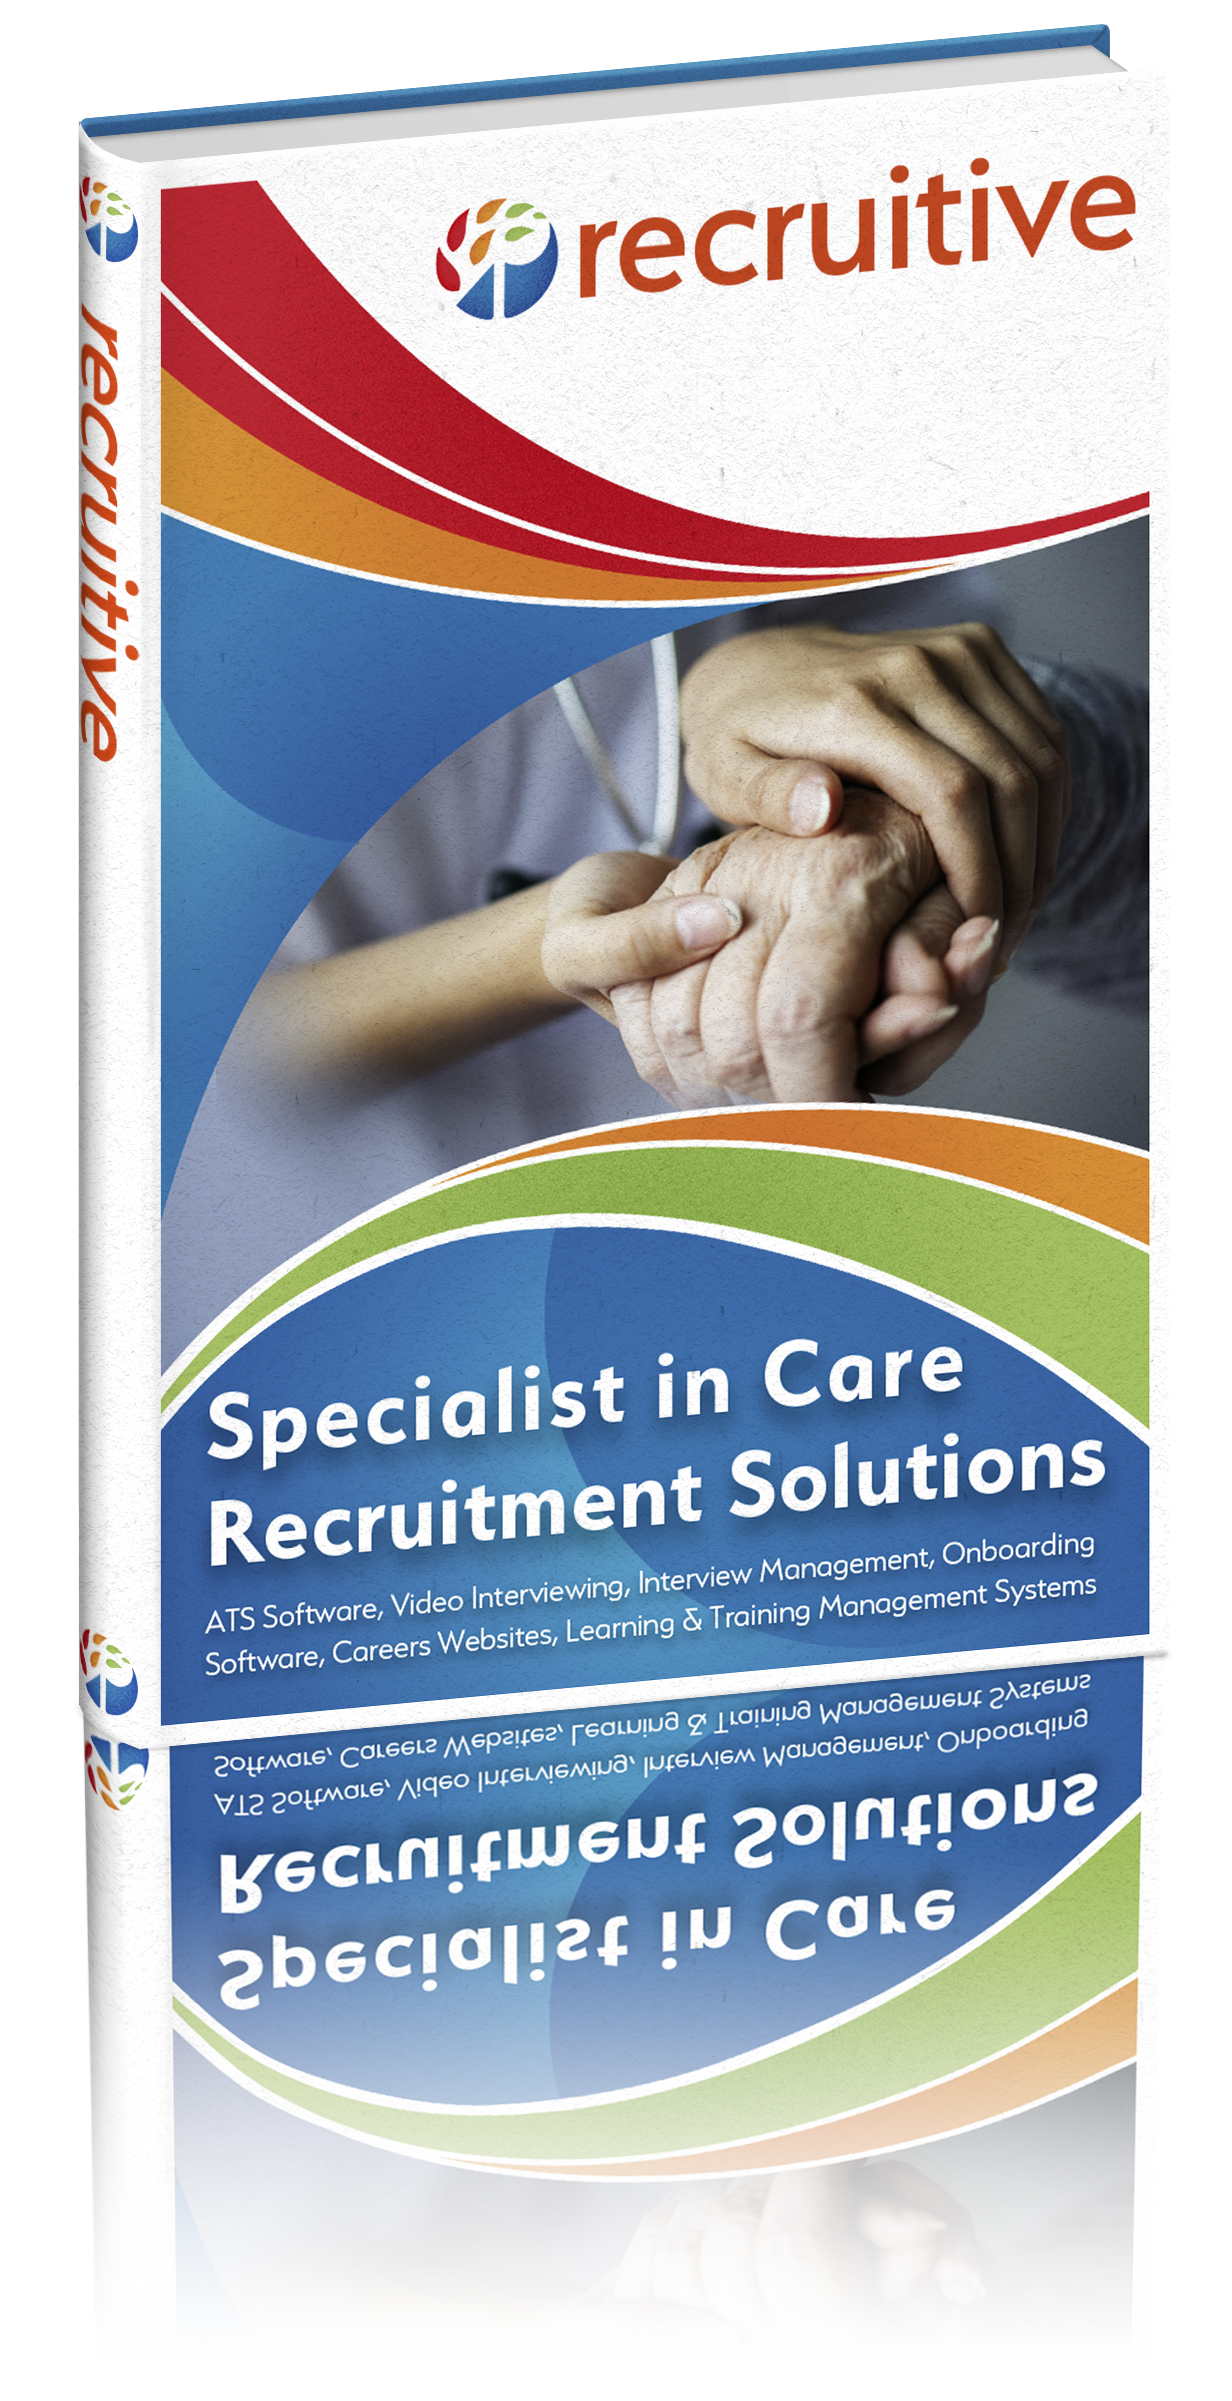 Specialists in Care